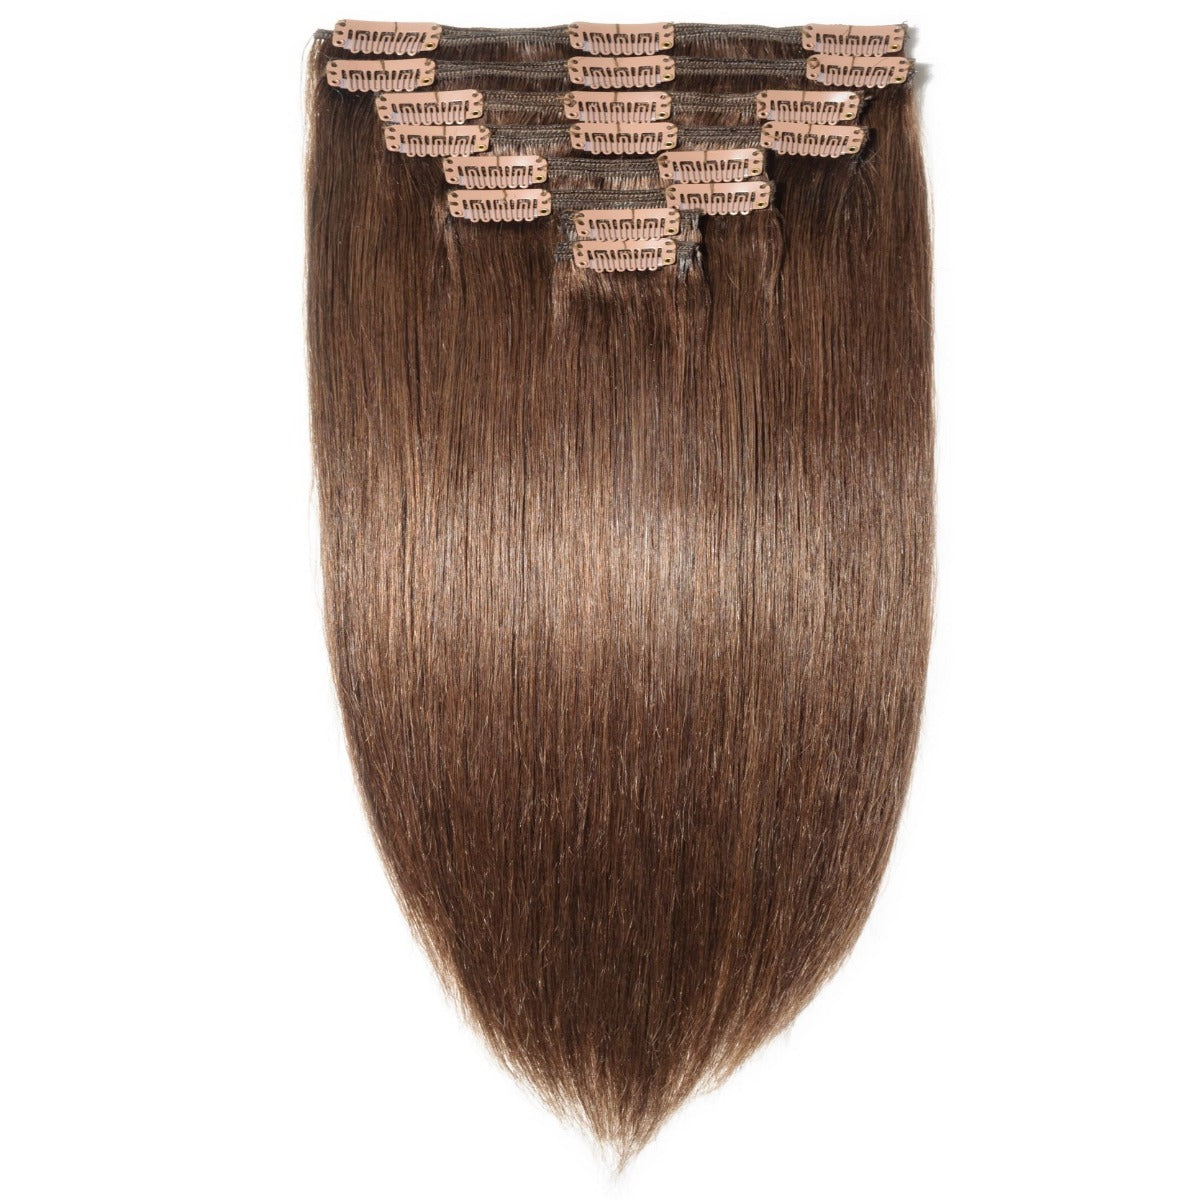 #4 Caramel Brown 100g Straight Clip-Ins